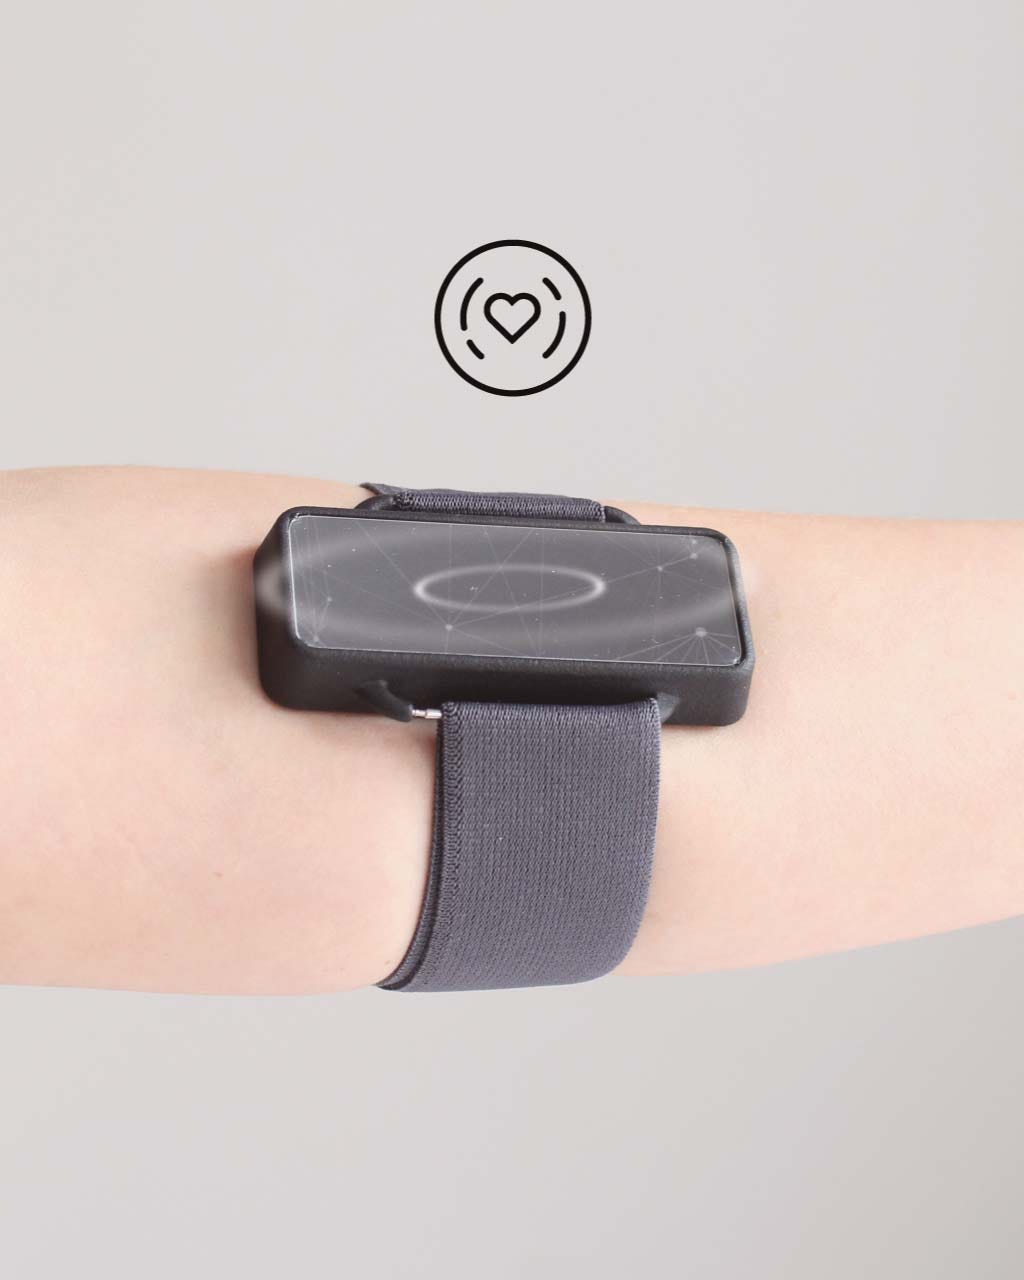 Sentero device on lower arm- with vibration lines and a heartbeat symbol